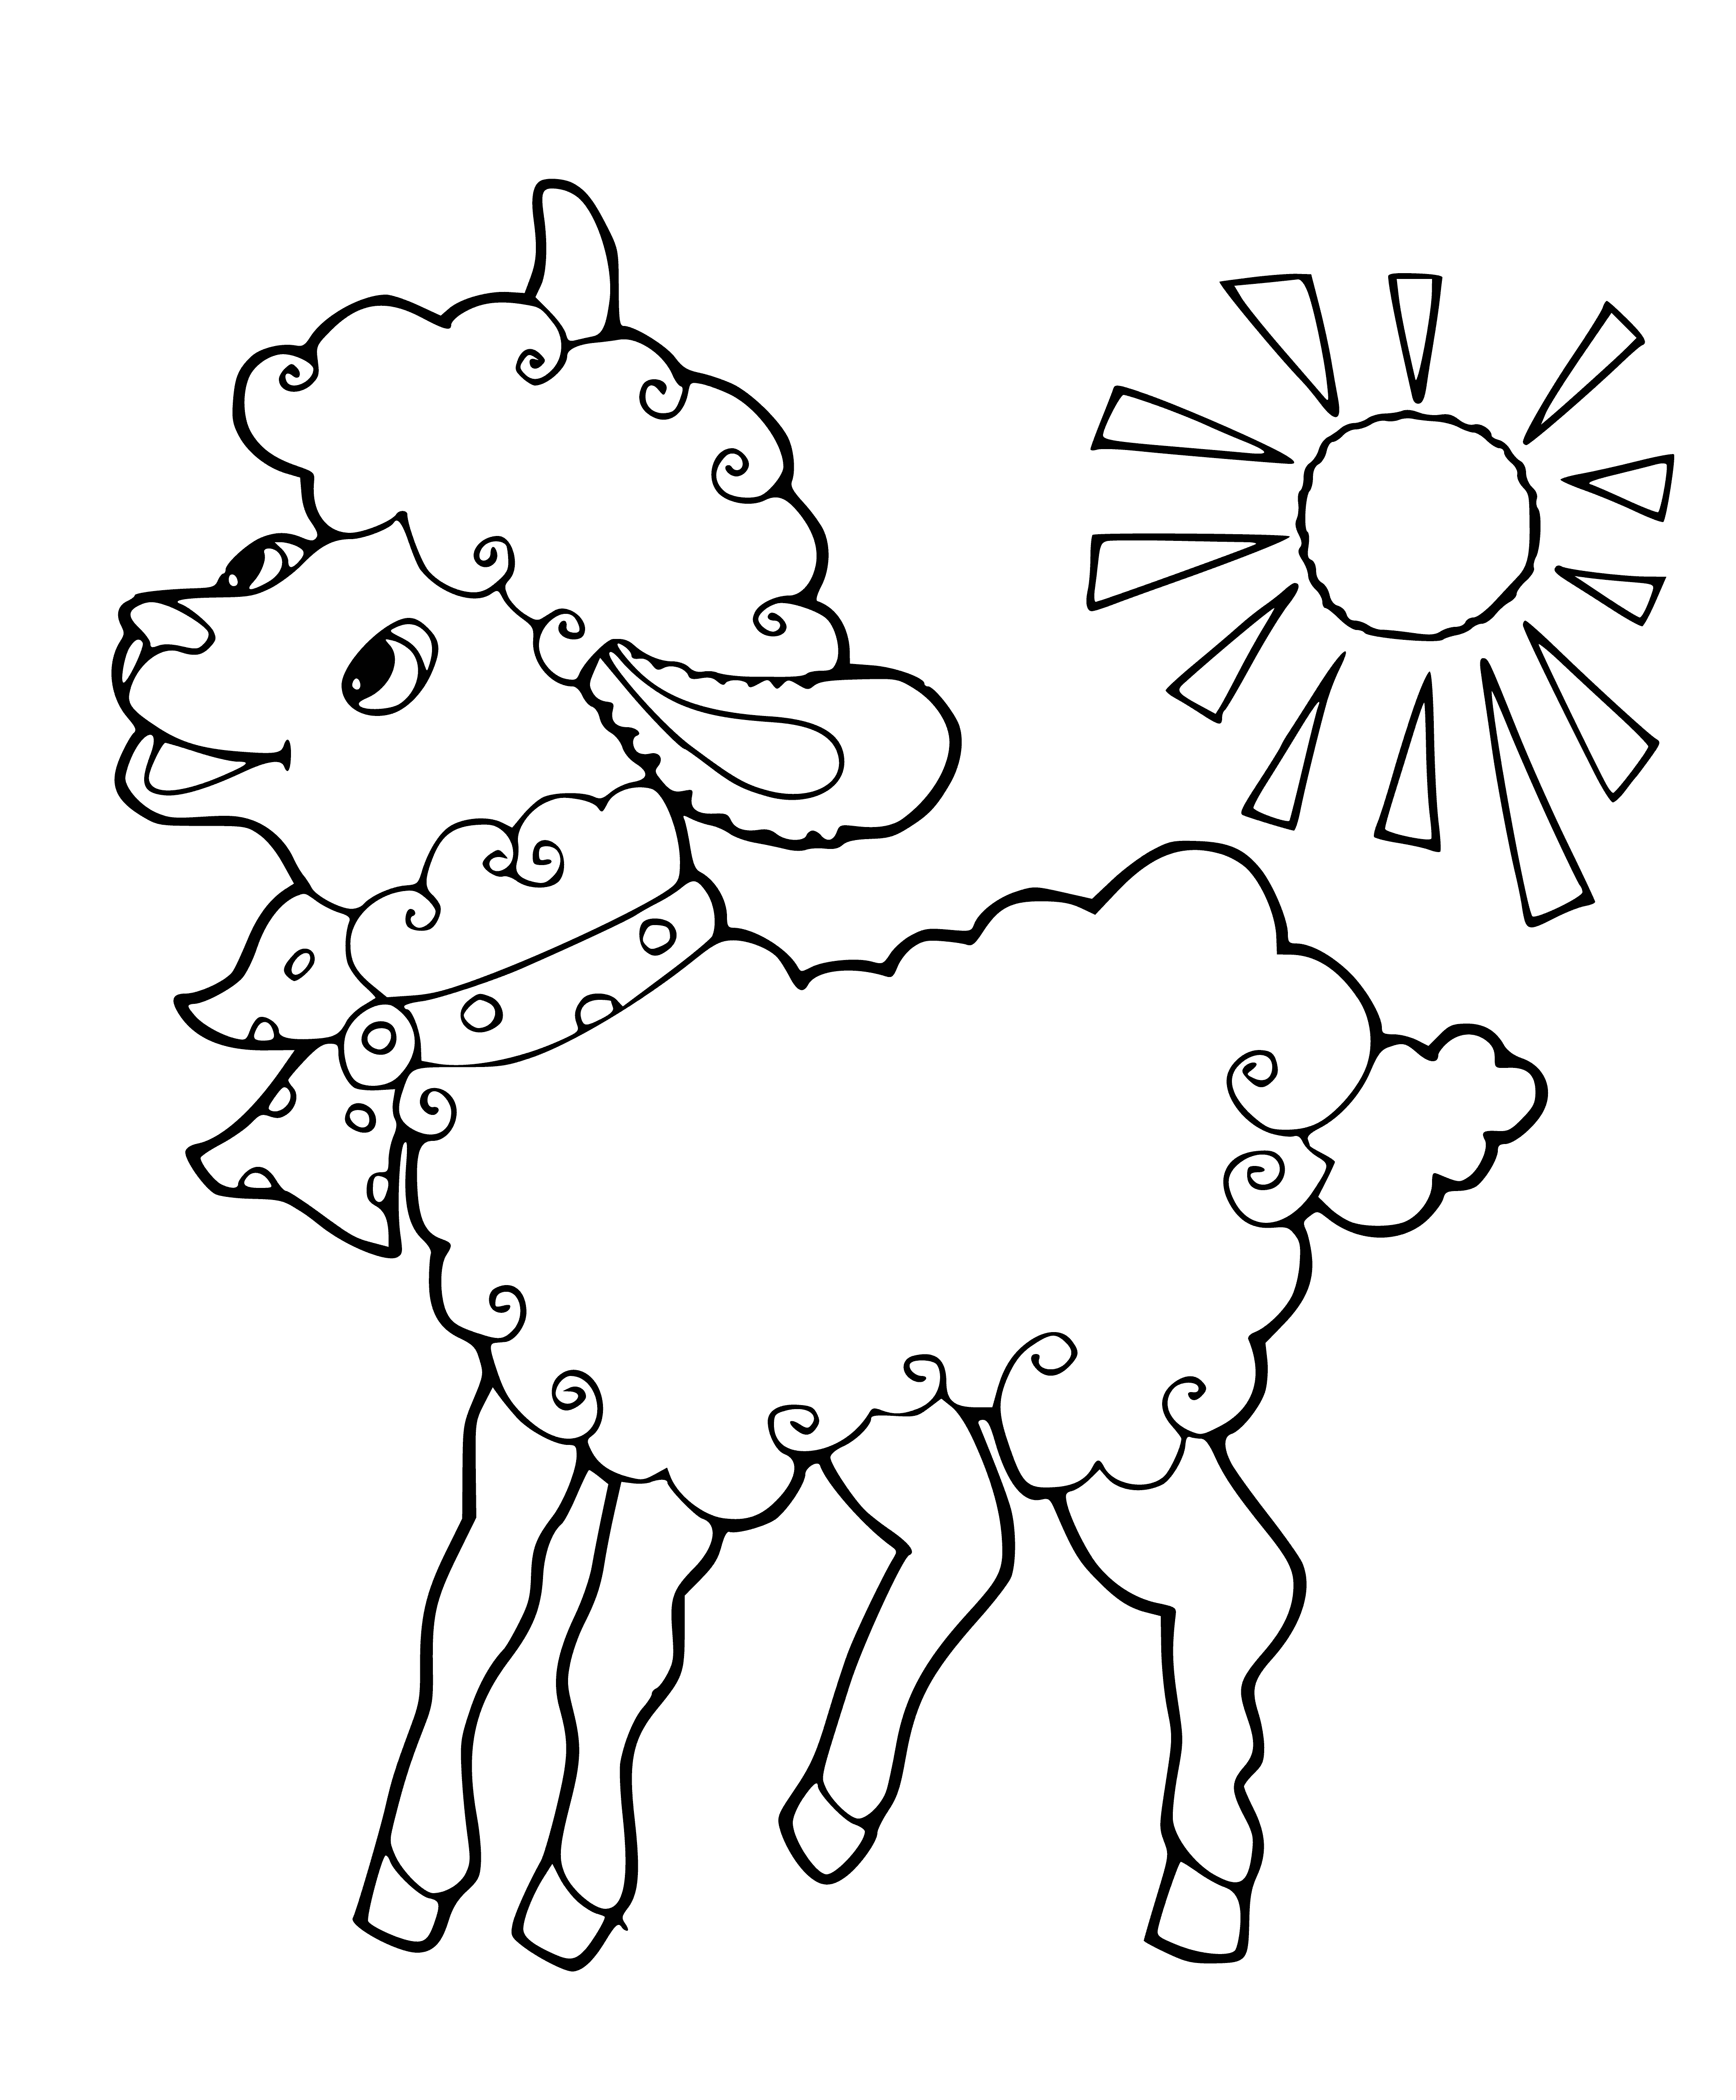 Sheep with a bow coloring page